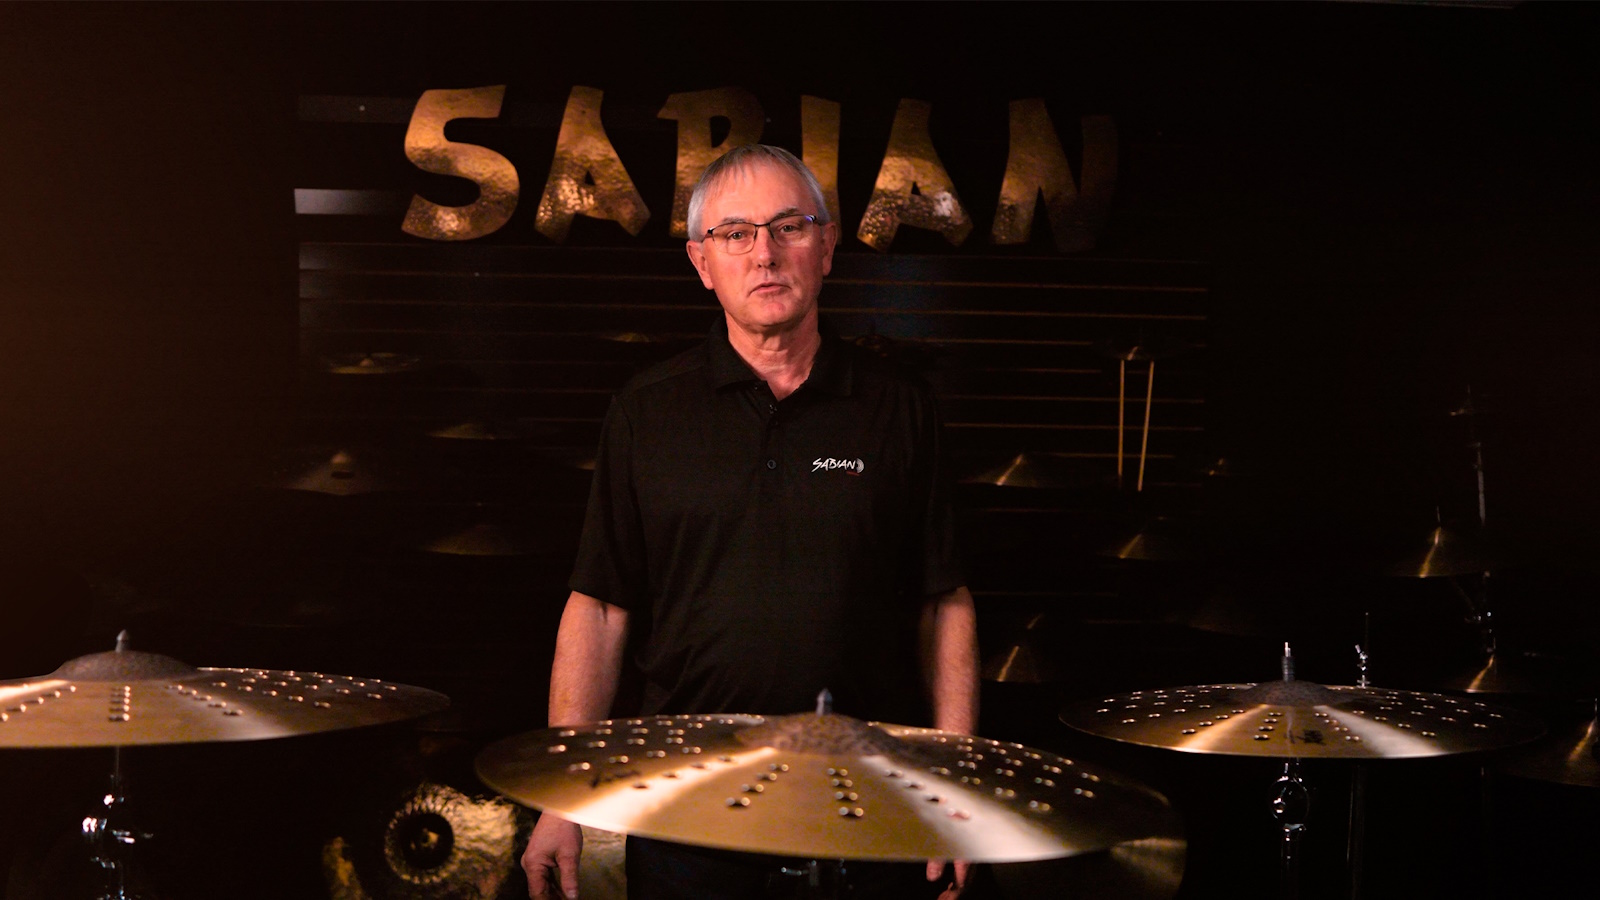 3. Mark Love stands behind three cymbal stands with three HHX Complex cymbals